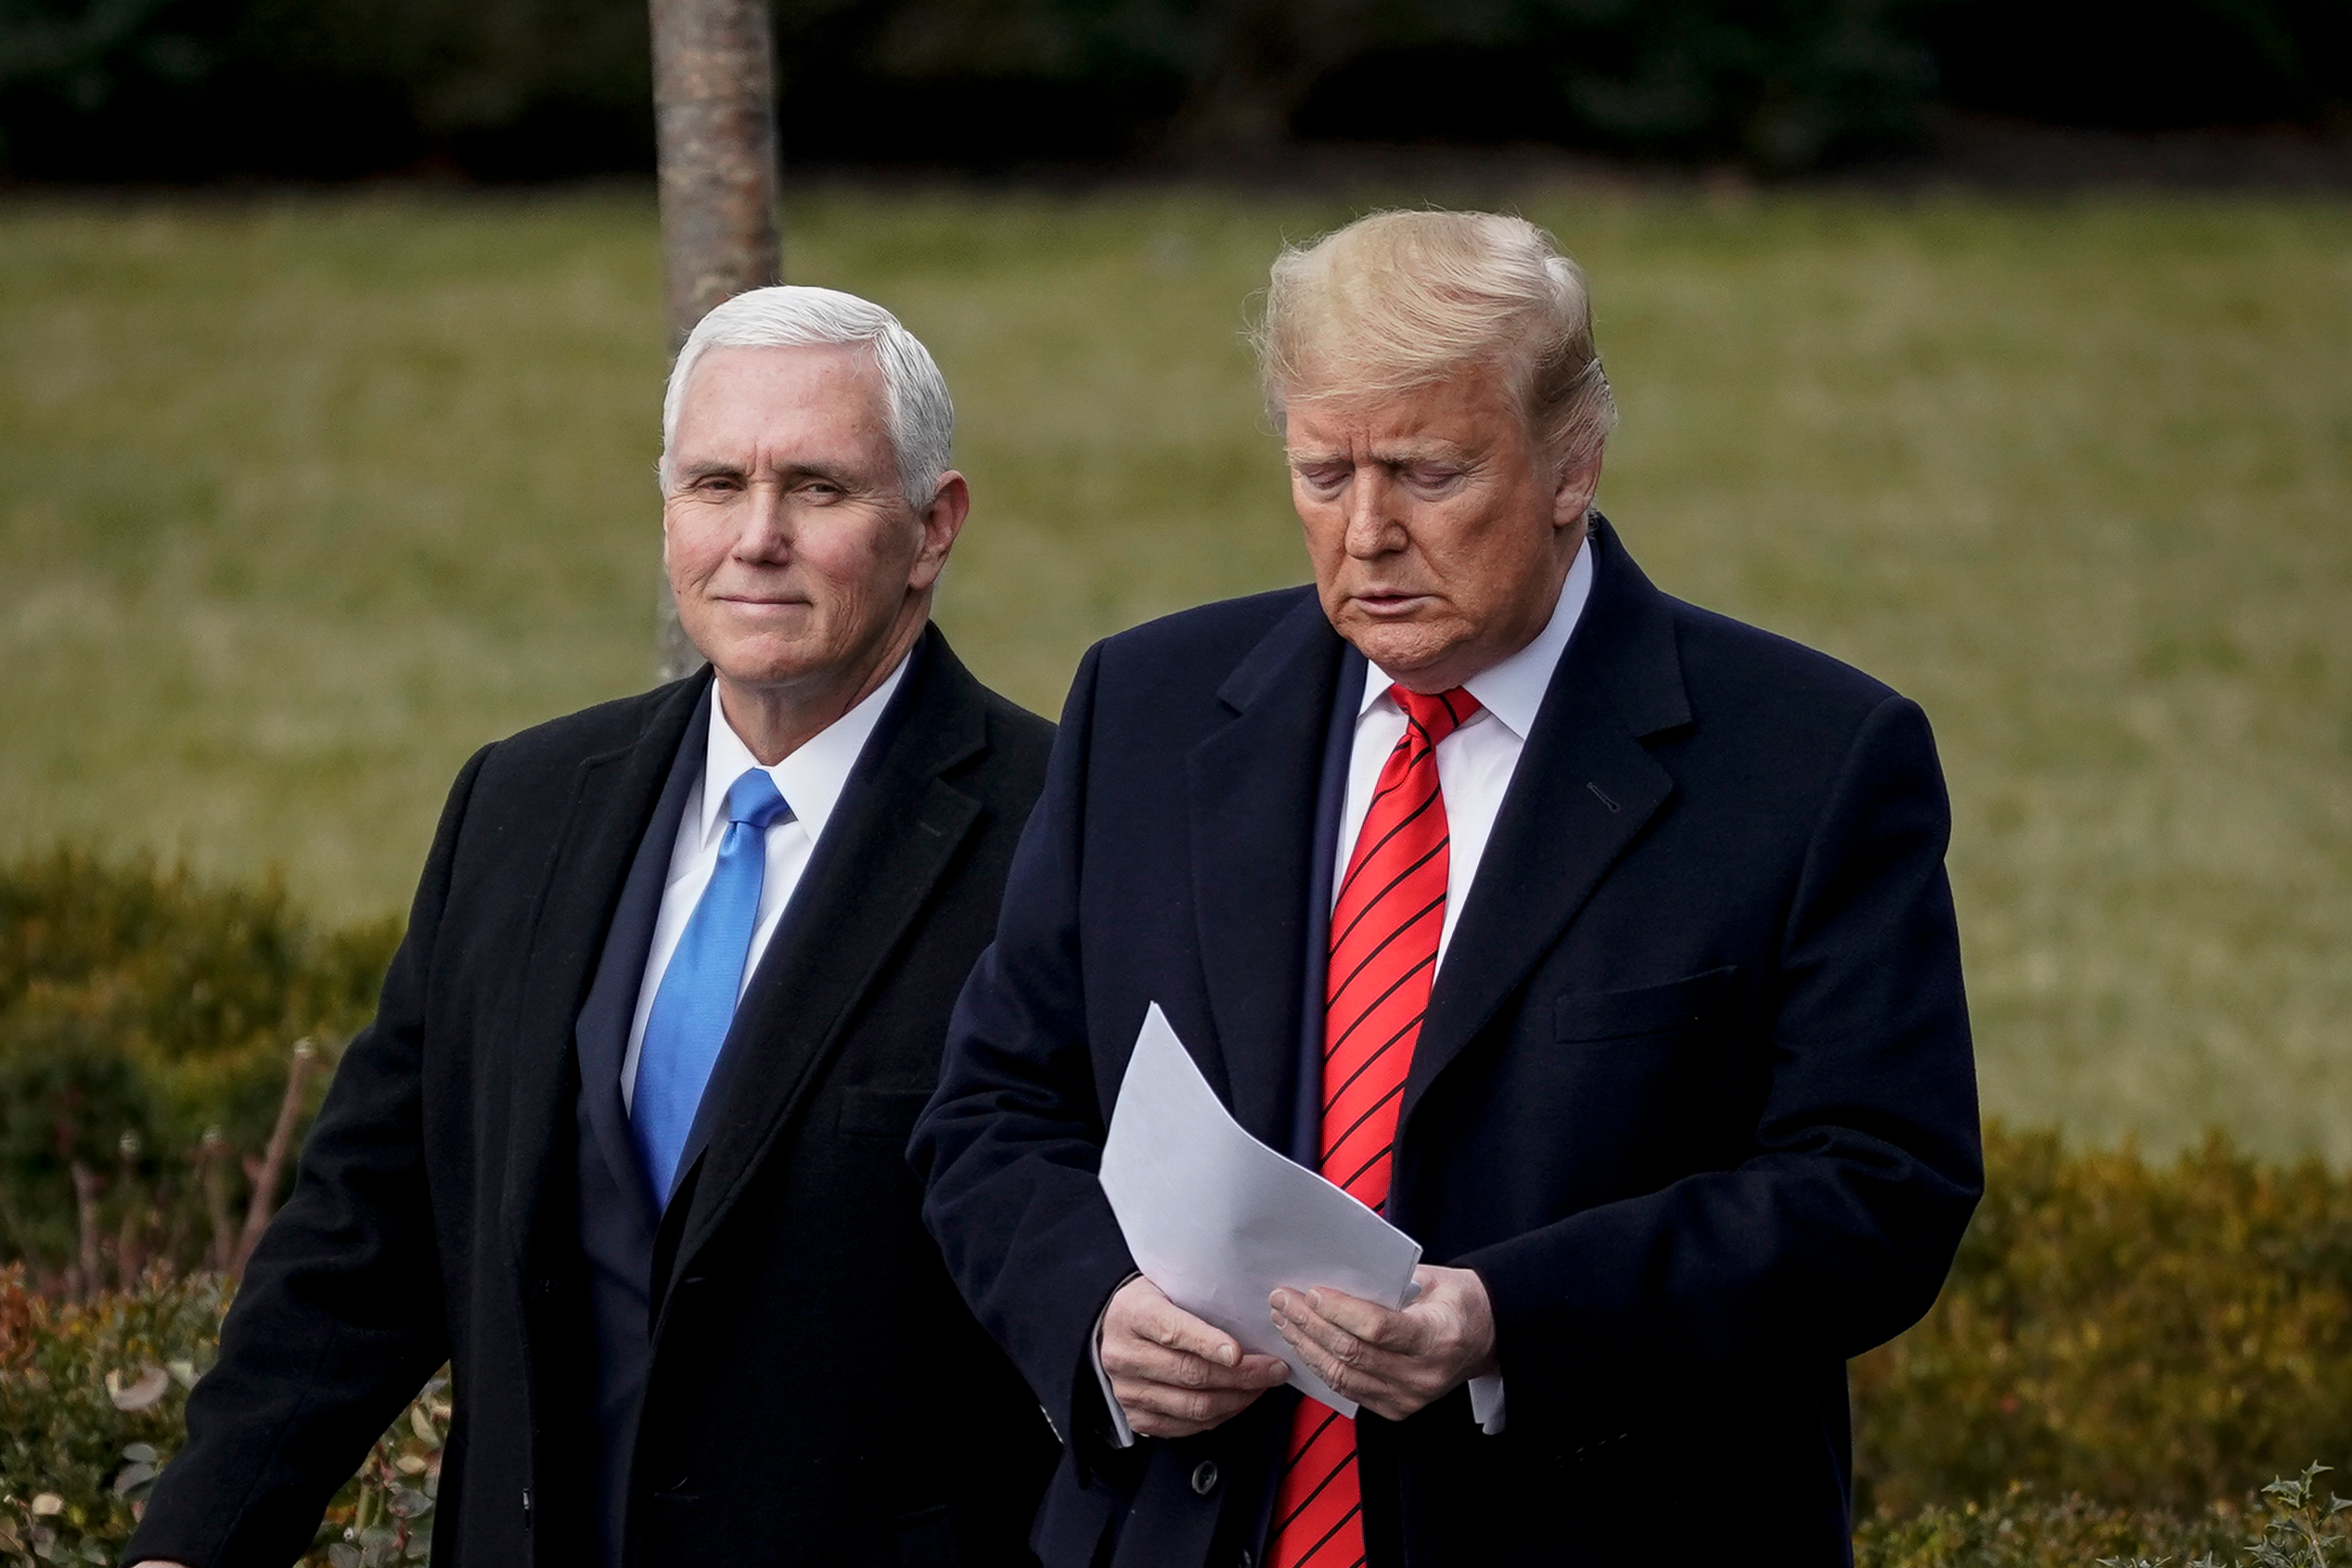 PHOTO: In this Jan. 29, 2020, file photo, former Vice President Mike Pence and former President Donald Trump arrive for a signing ceremony for the United States-Mexico-Canada Trade Agreement on the South Lawn of the White House in Washington, D.C.